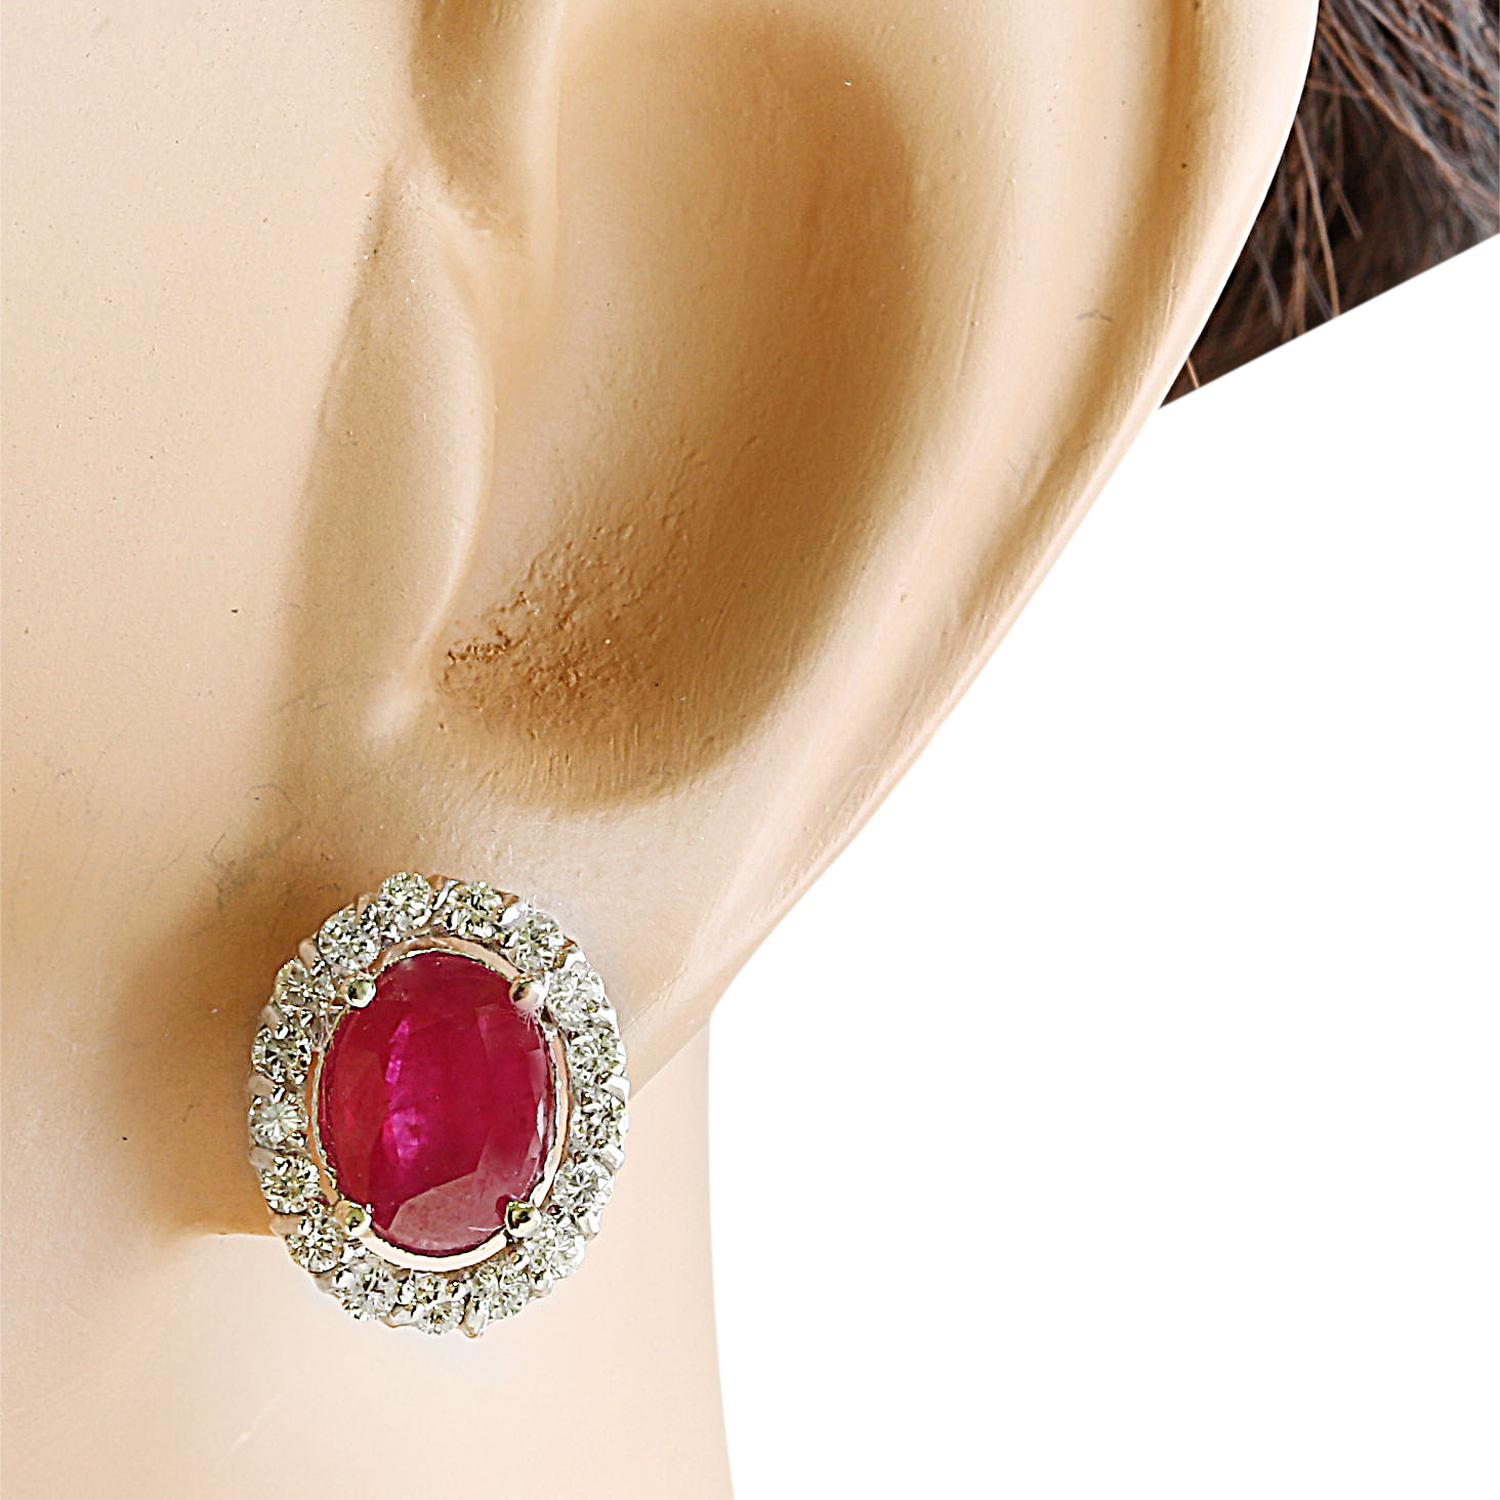 3.60 Carat Natural Ruby 14 Karat Solid White Gold Diamond Earrings
Stamped: 14K
Total Earrings Weight: 2.8 Grams 
Ruby Weight: 2.90 Carat (8.00x6.00 Millimeters)  
Quantity: 2
Diamond Weight: 0.70 Carat (F-G Color, VS2-SI1 Clarity )
Quantity: